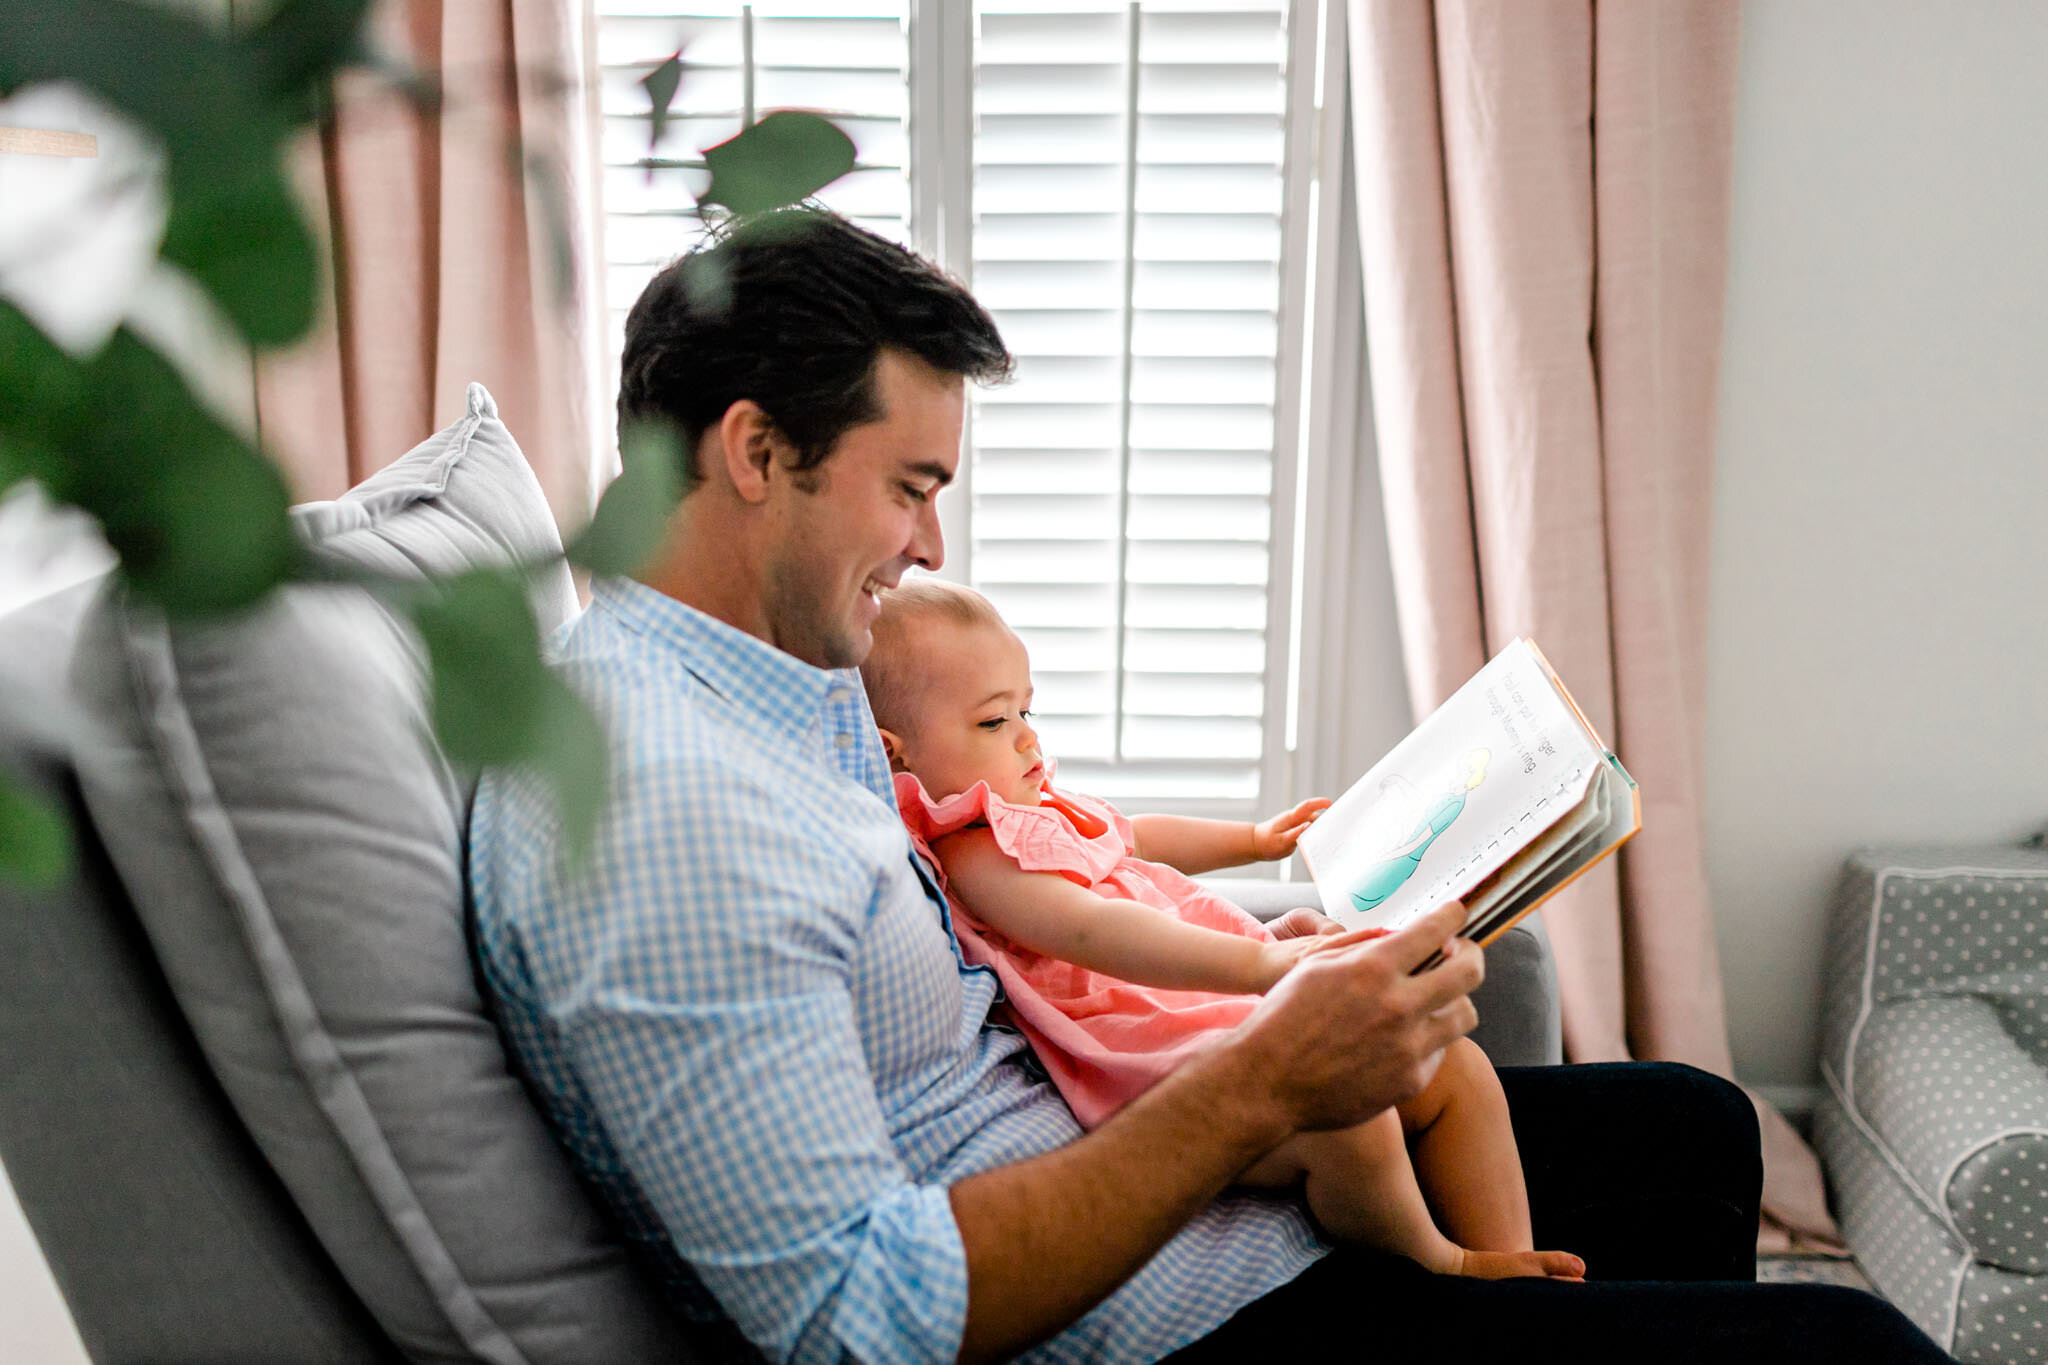 Lifestyle Durham Family Photographer | By G. Lin Photography | Dad reading book to baby girl on chair